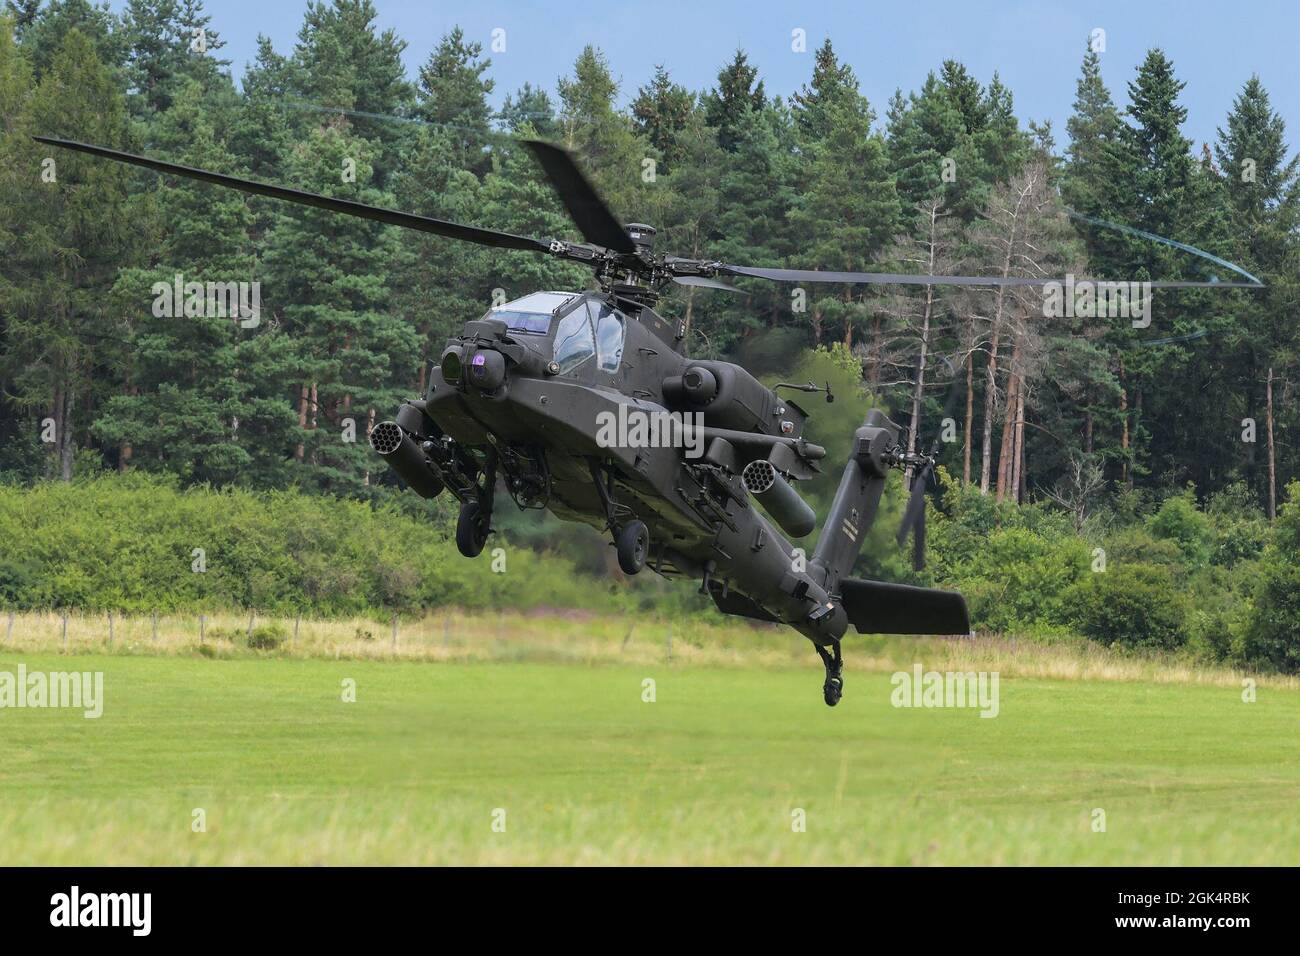 U.S. Soldiers, assigned to 1st Combat Aviation Brigade, 1st Infantry Division, come in for a landing at a forward arming and refueling point in a AH-64D Apache Longbow attack helicopter prior to aerial gunnery training at the 7th Army Training Command's Grafenwoehr Training Area, Germany, Aug. 4, 2021. Stock Photo